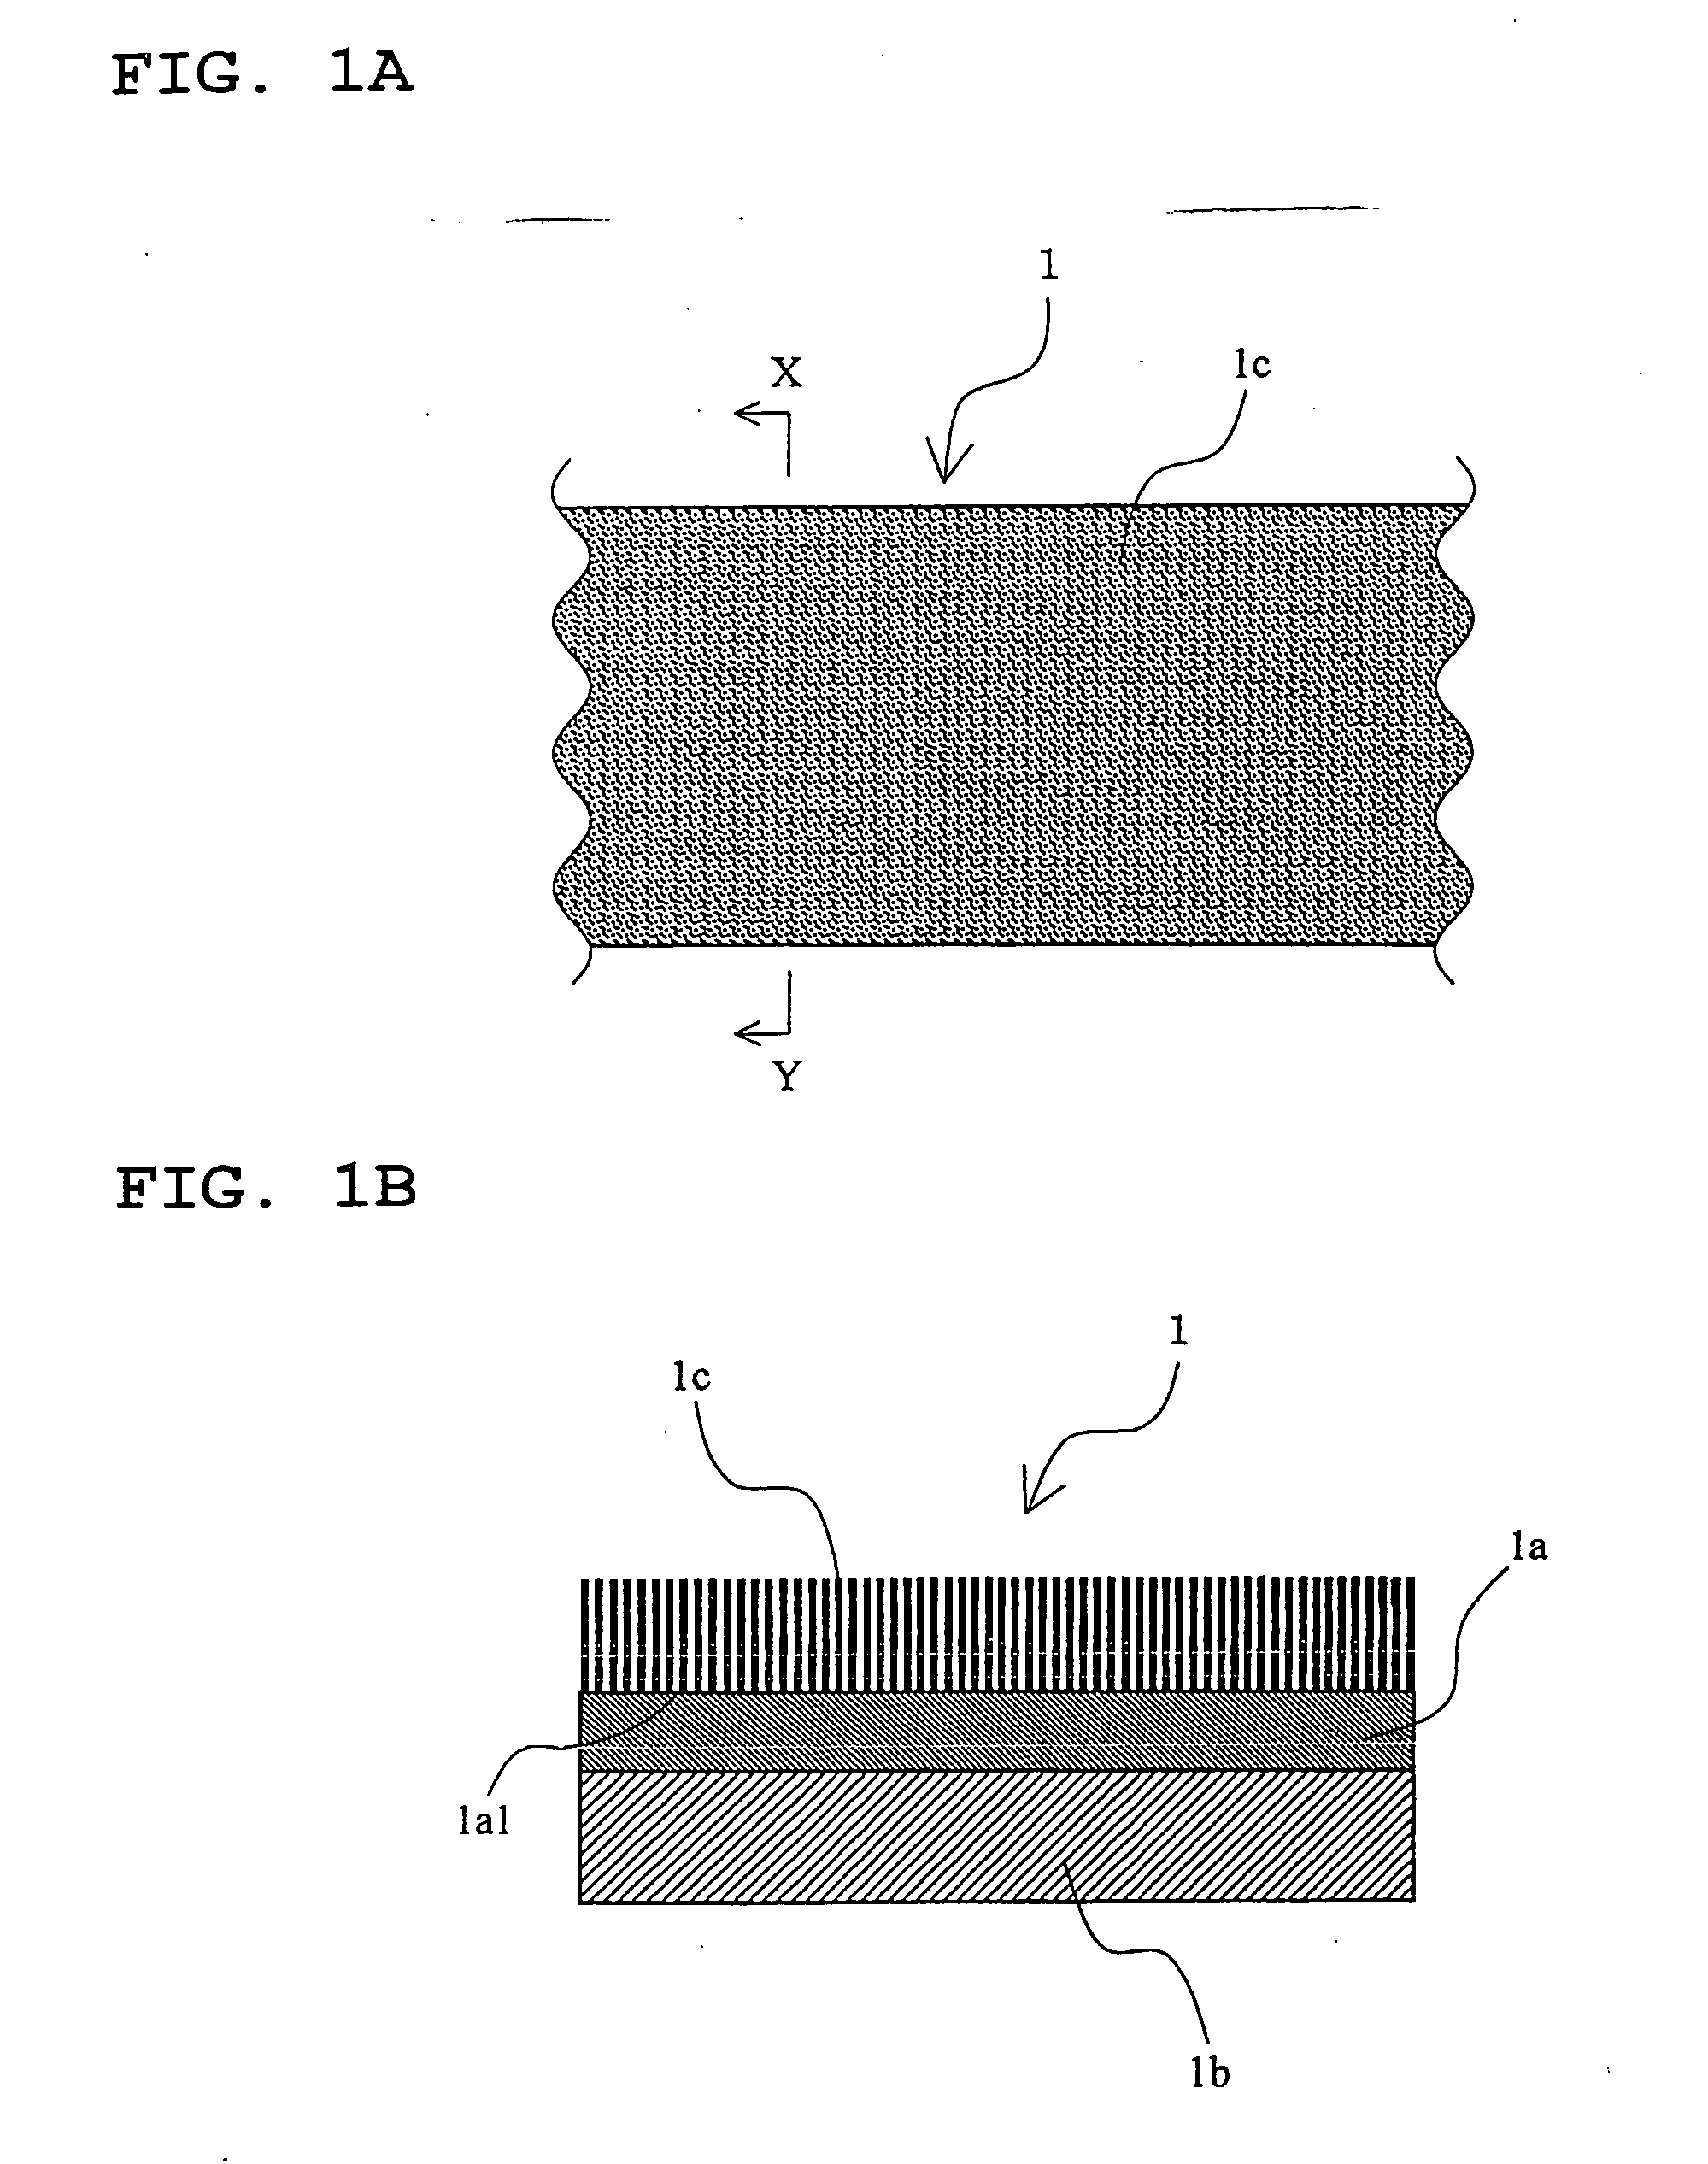 Structure having a characteristic of conducting or absorbing electromagnetic waves